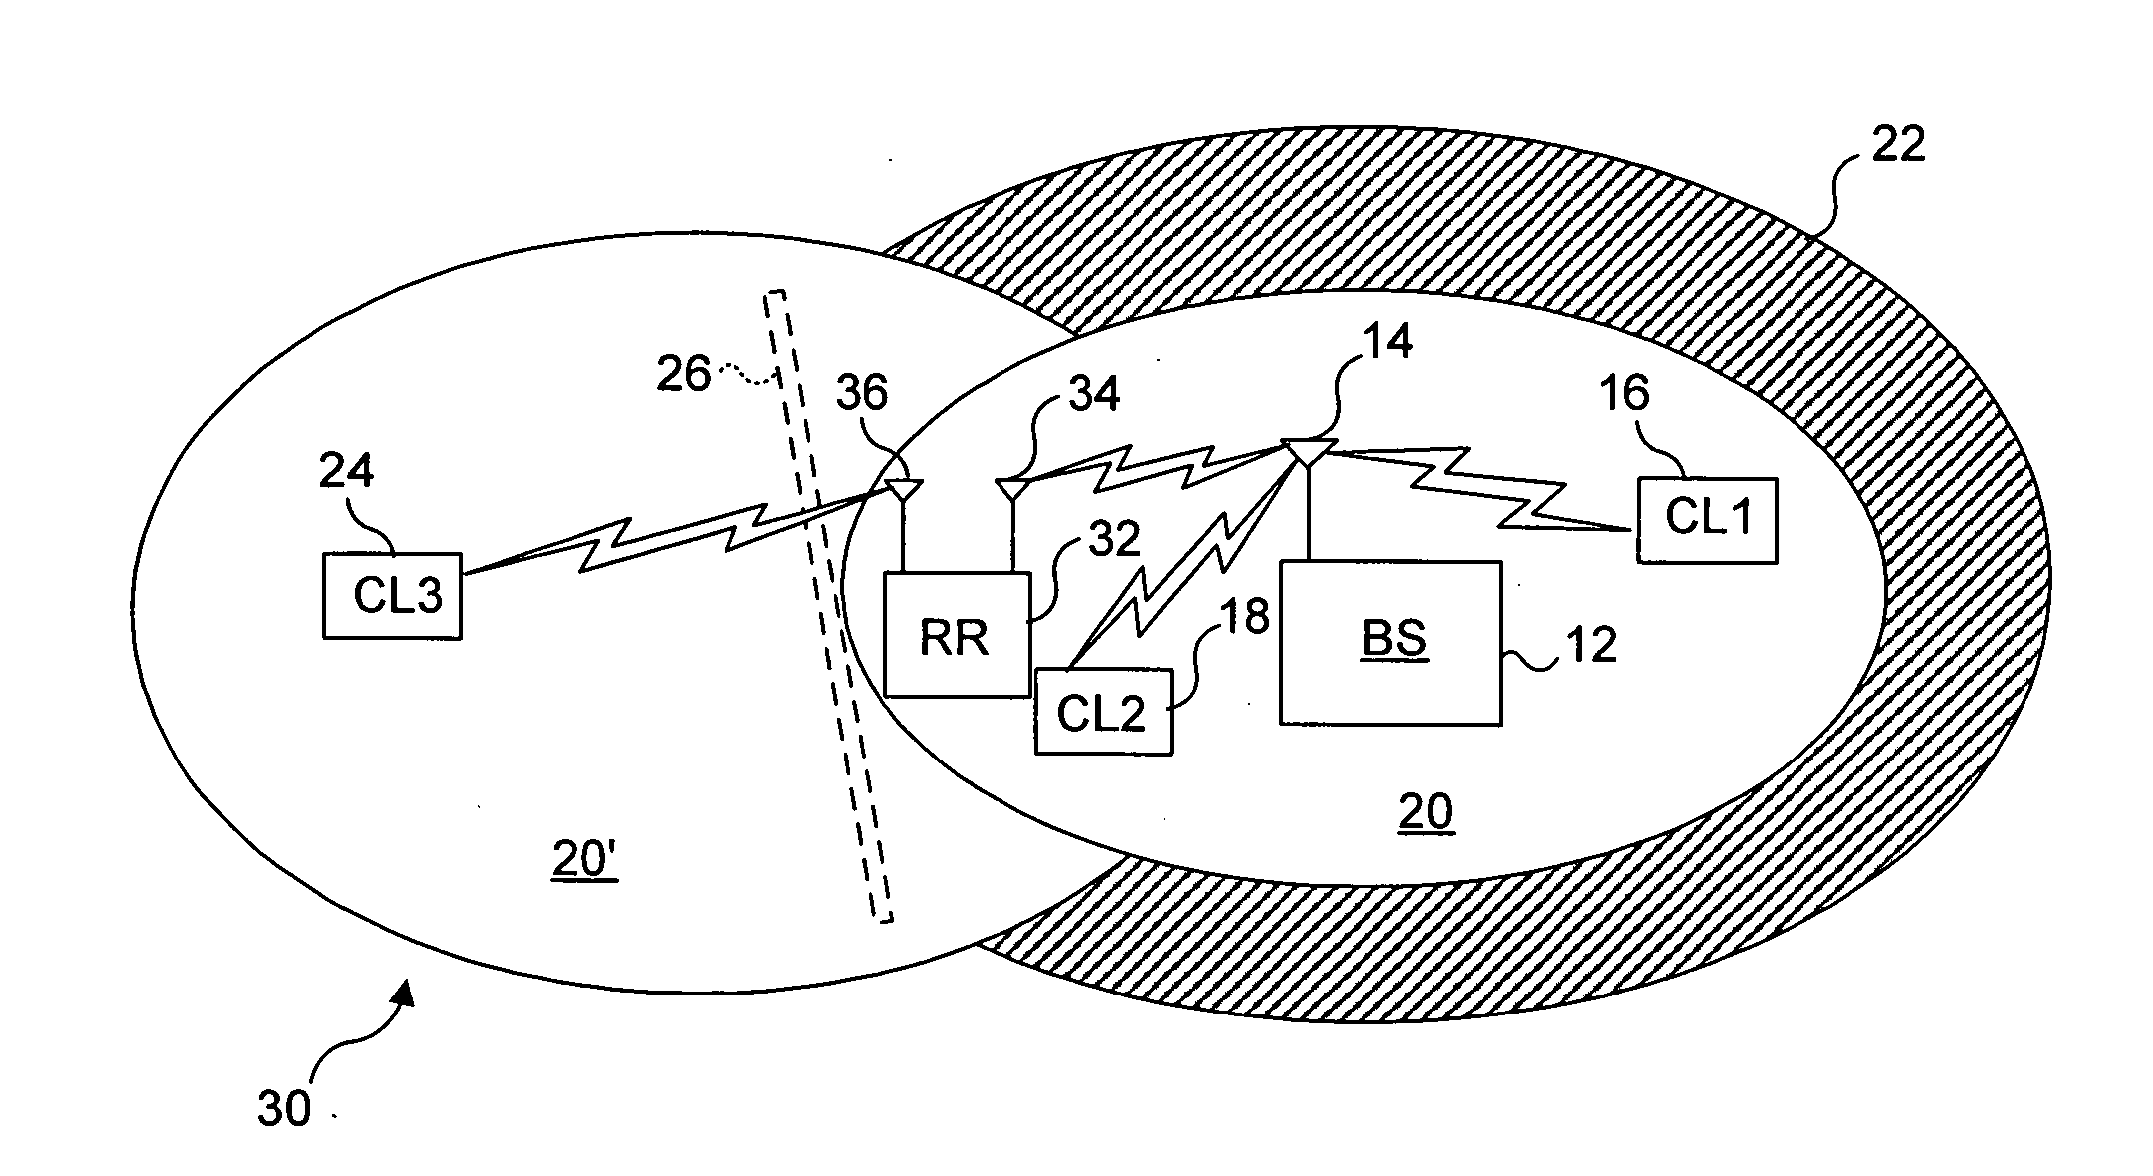 Wireless local area network translating bi-directional packet repeater